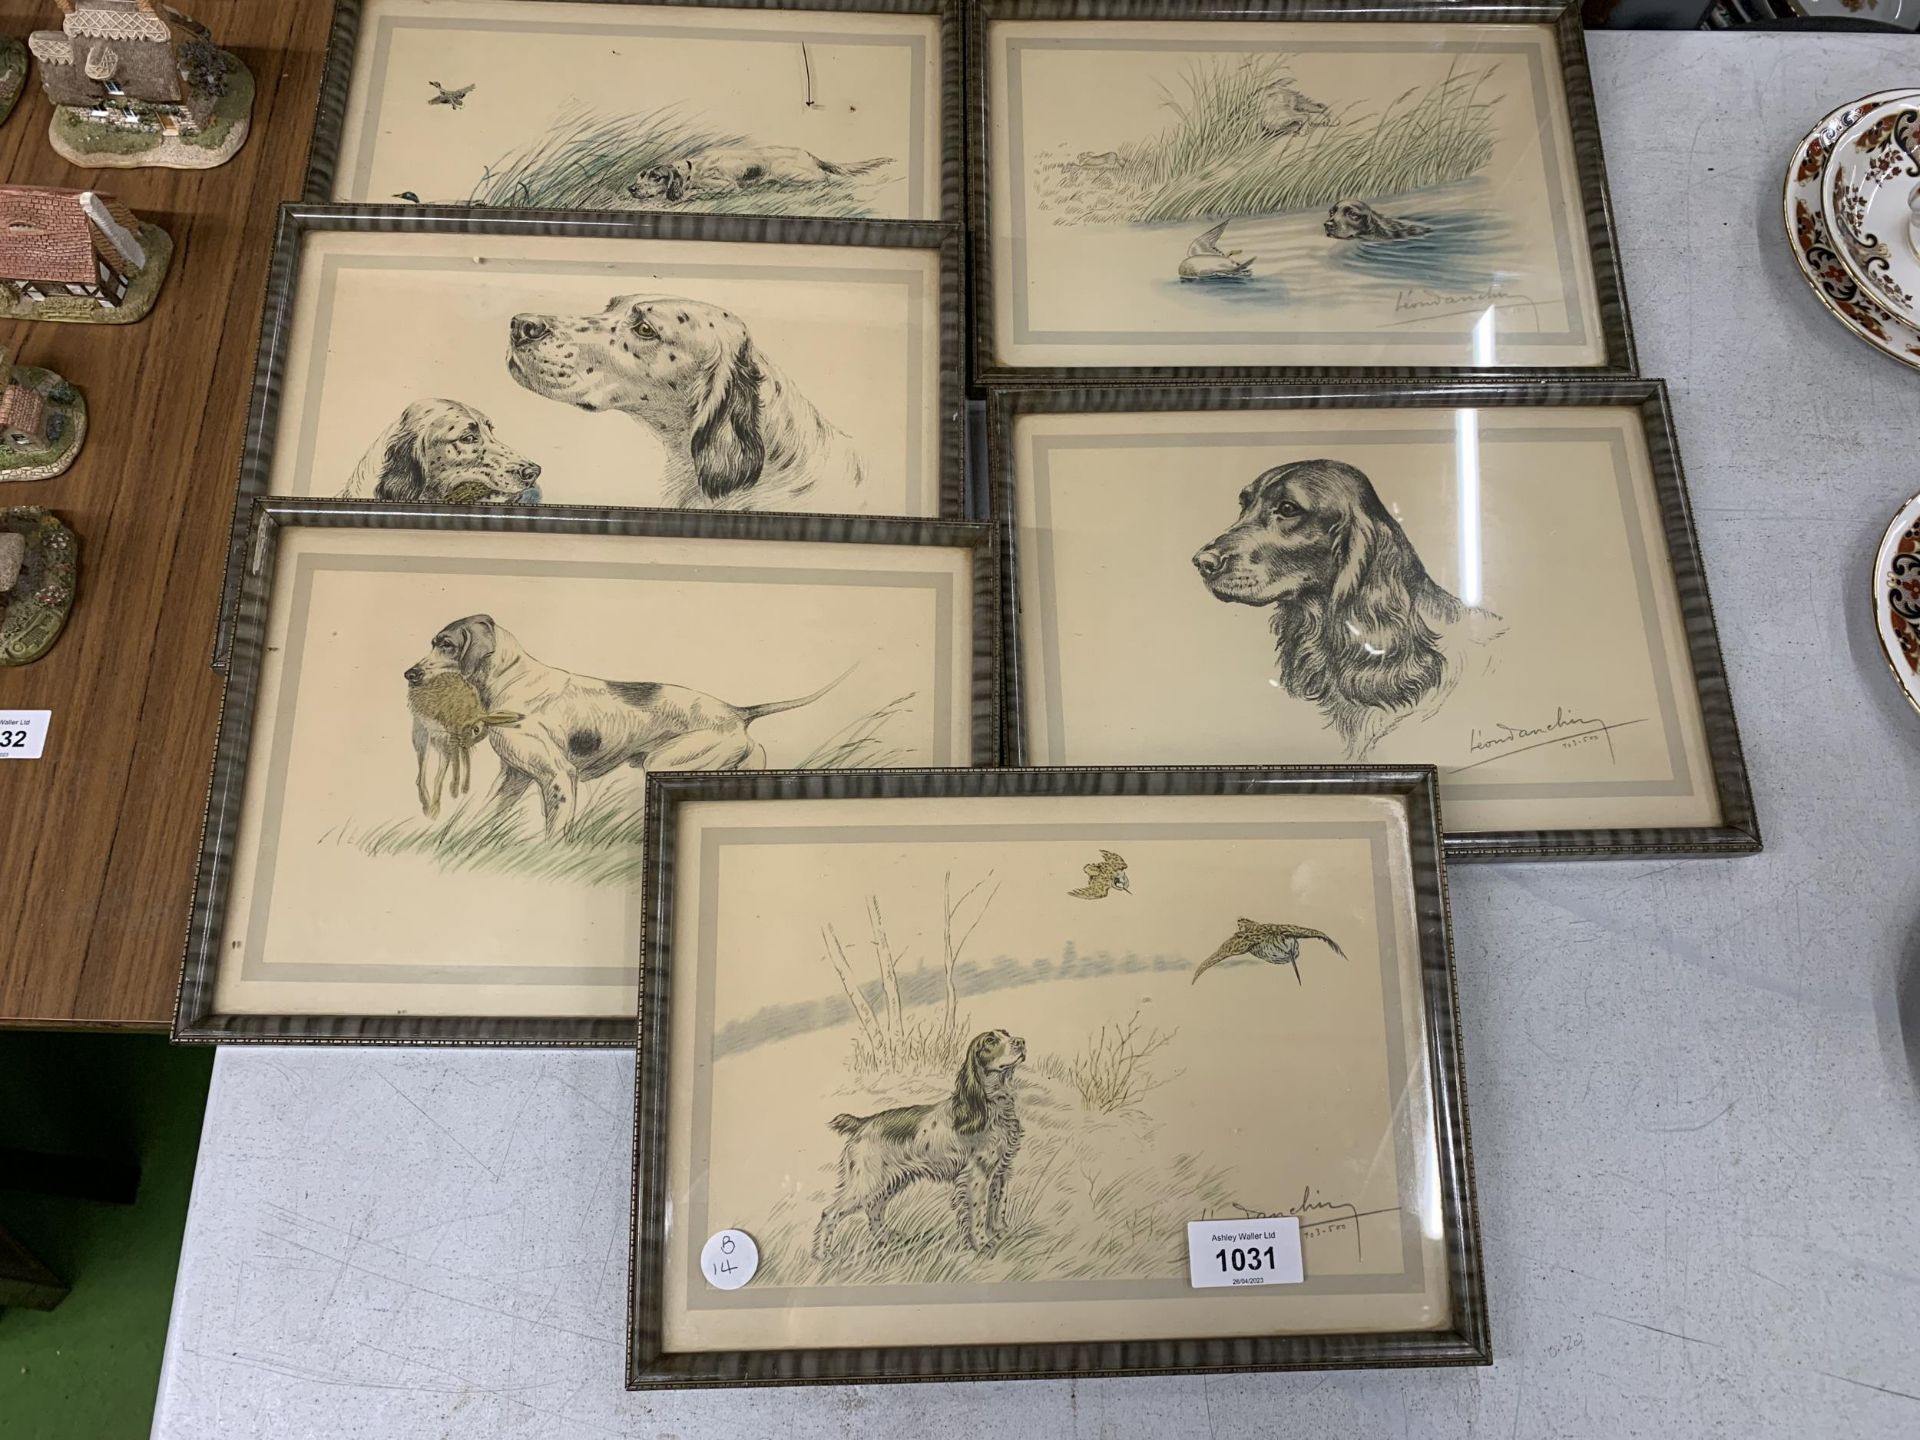 SIX LIMITED EDITION PENCIL PRINTS OF HUNTING DOGS SIGNED BY THE ARTIST